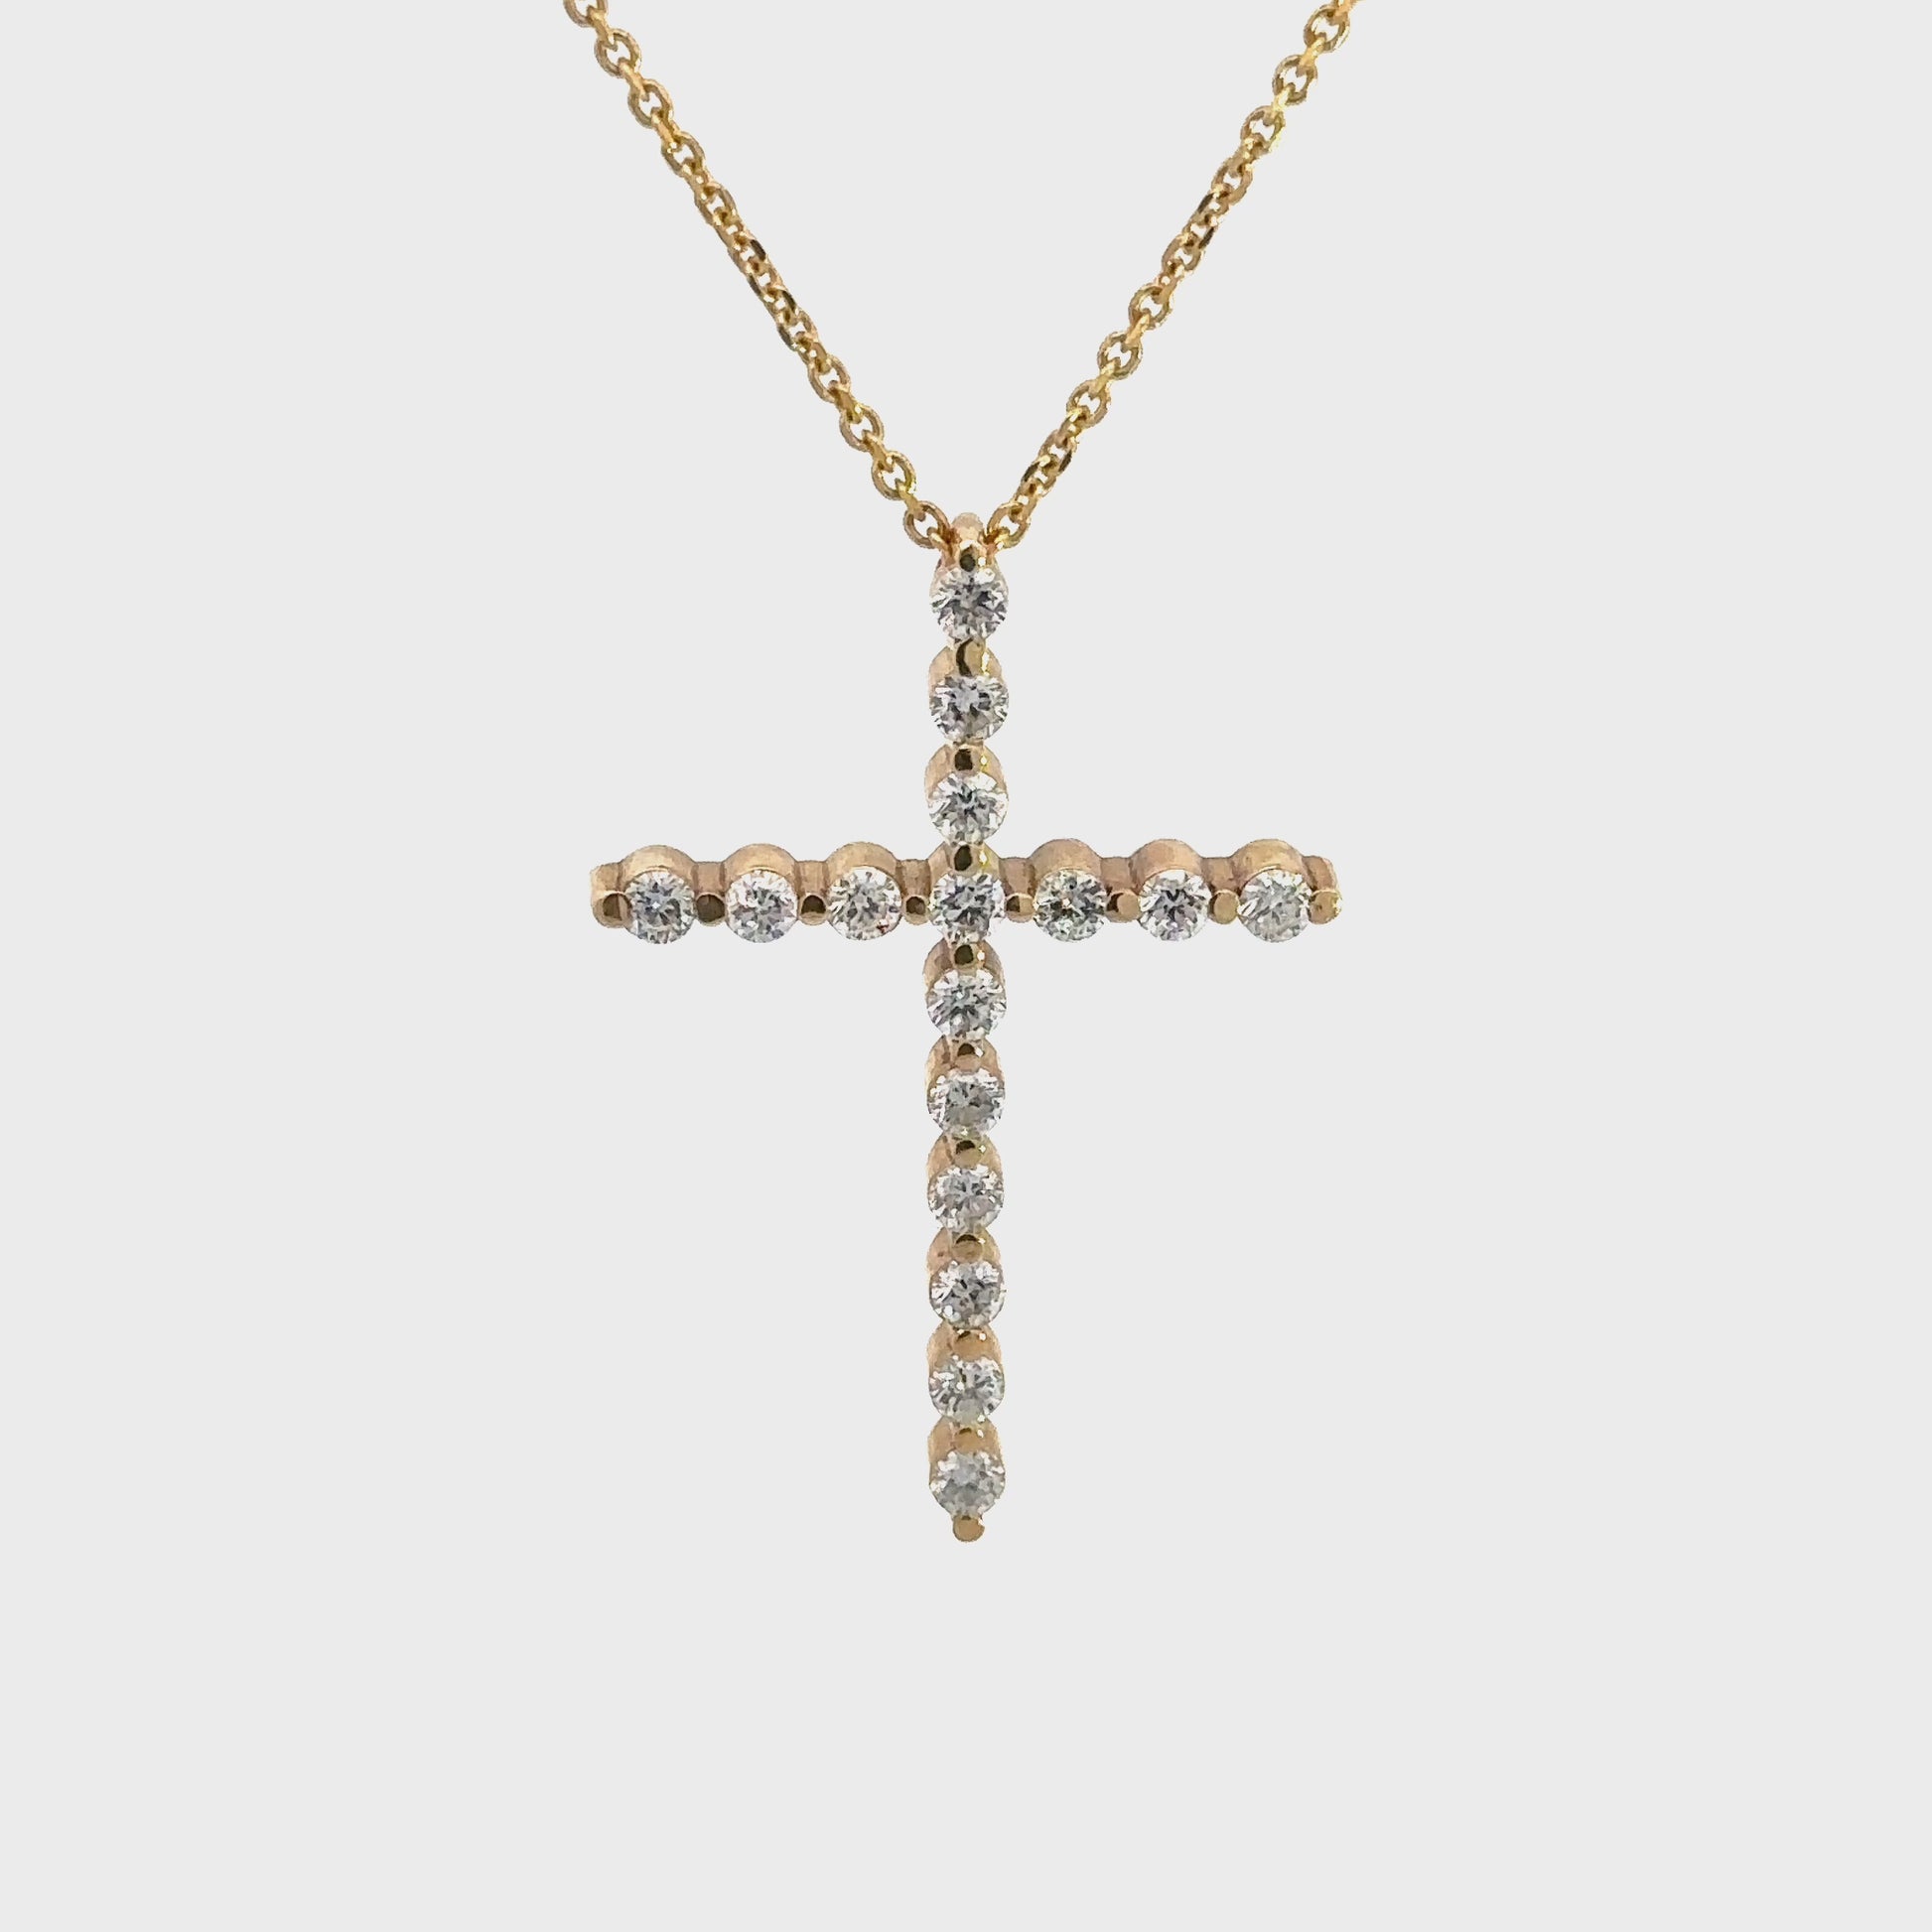 360 Video of diamond cross necklace with thin link chain